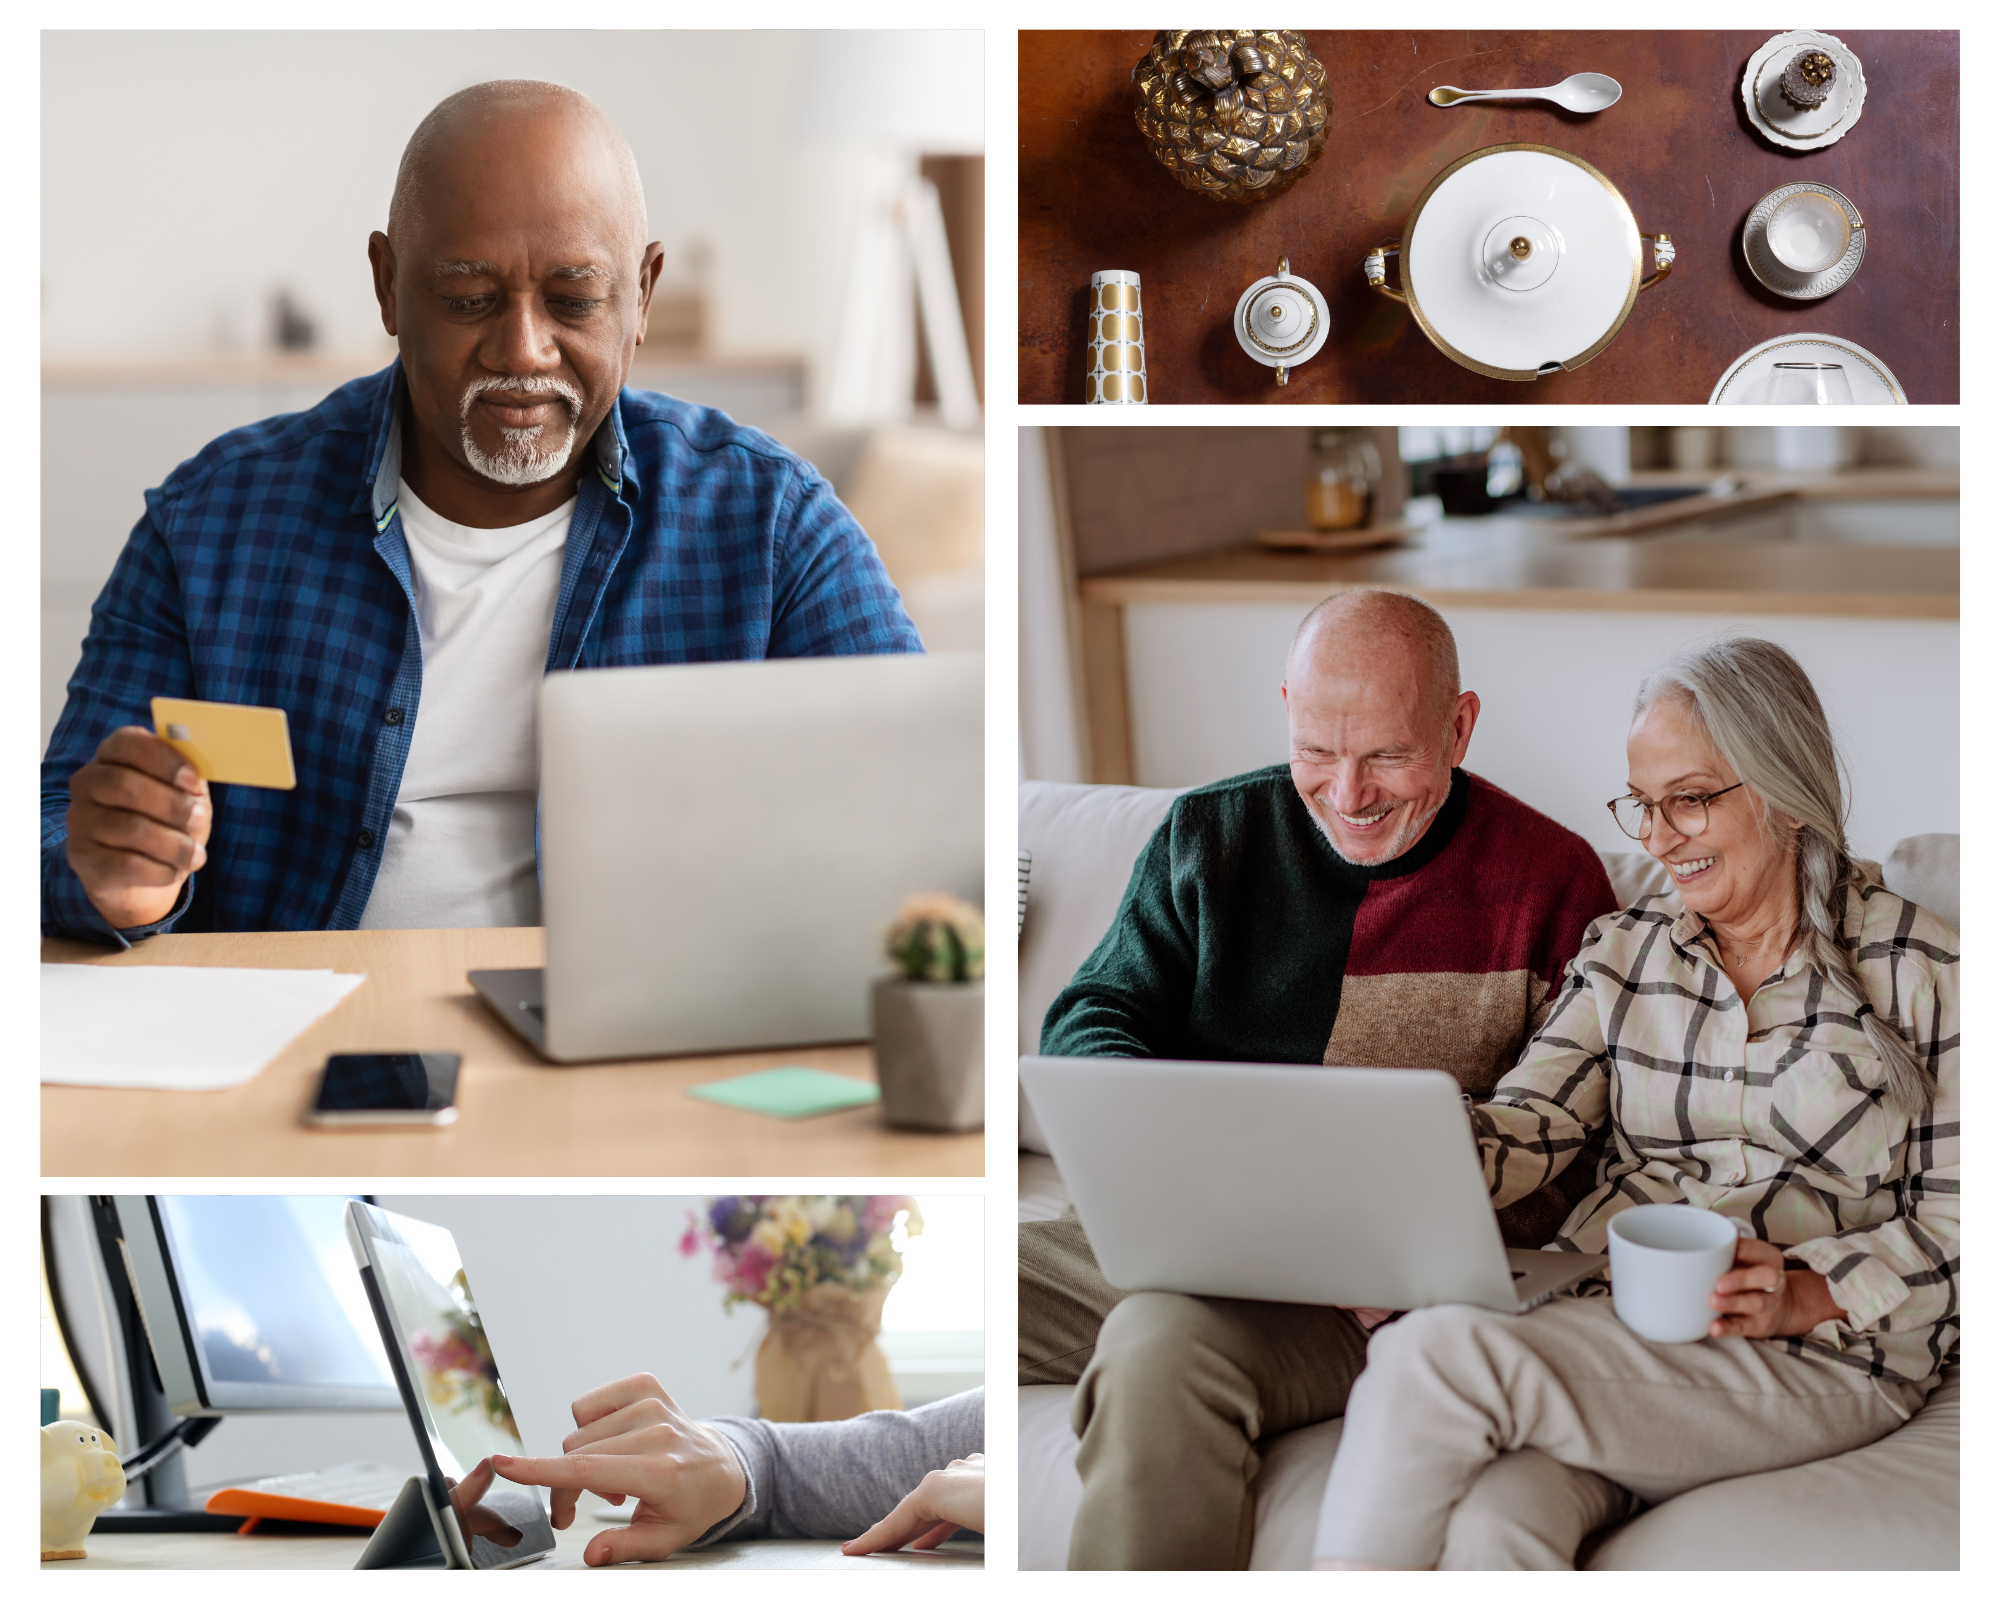 Purchases Seniors Should Take Advantage of for Cyber Monday